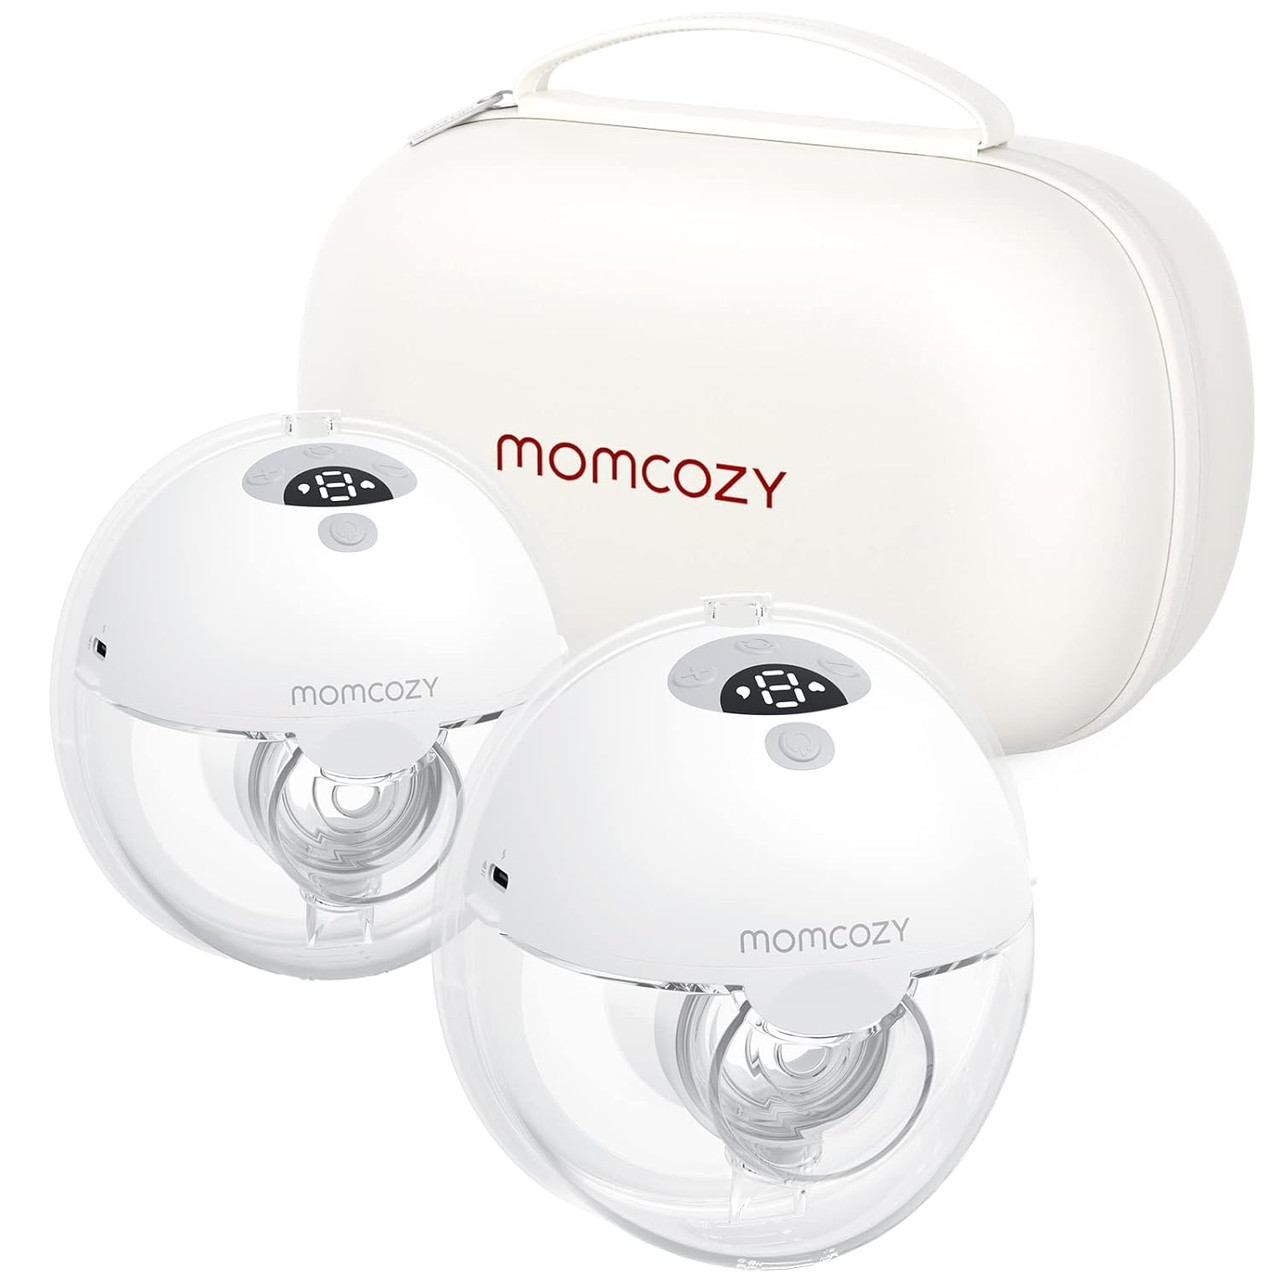 All-in-one M5 Wearable Breast Pump- Covered by Tricare - For Mom and Keiki